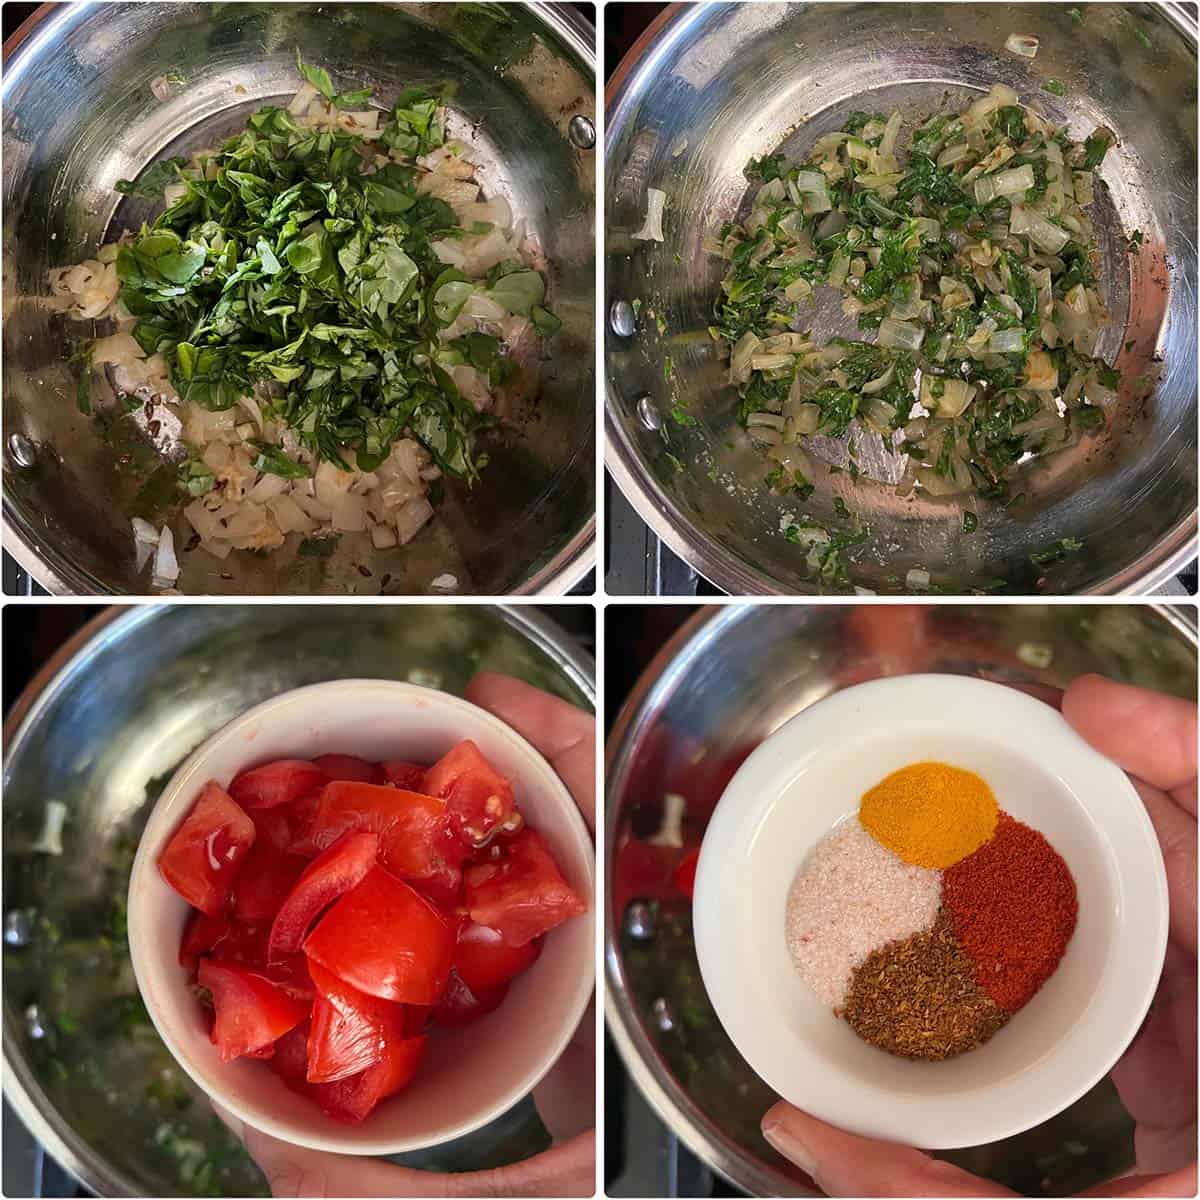 4 panel photo showing the cooking of methi, tomato and spices.